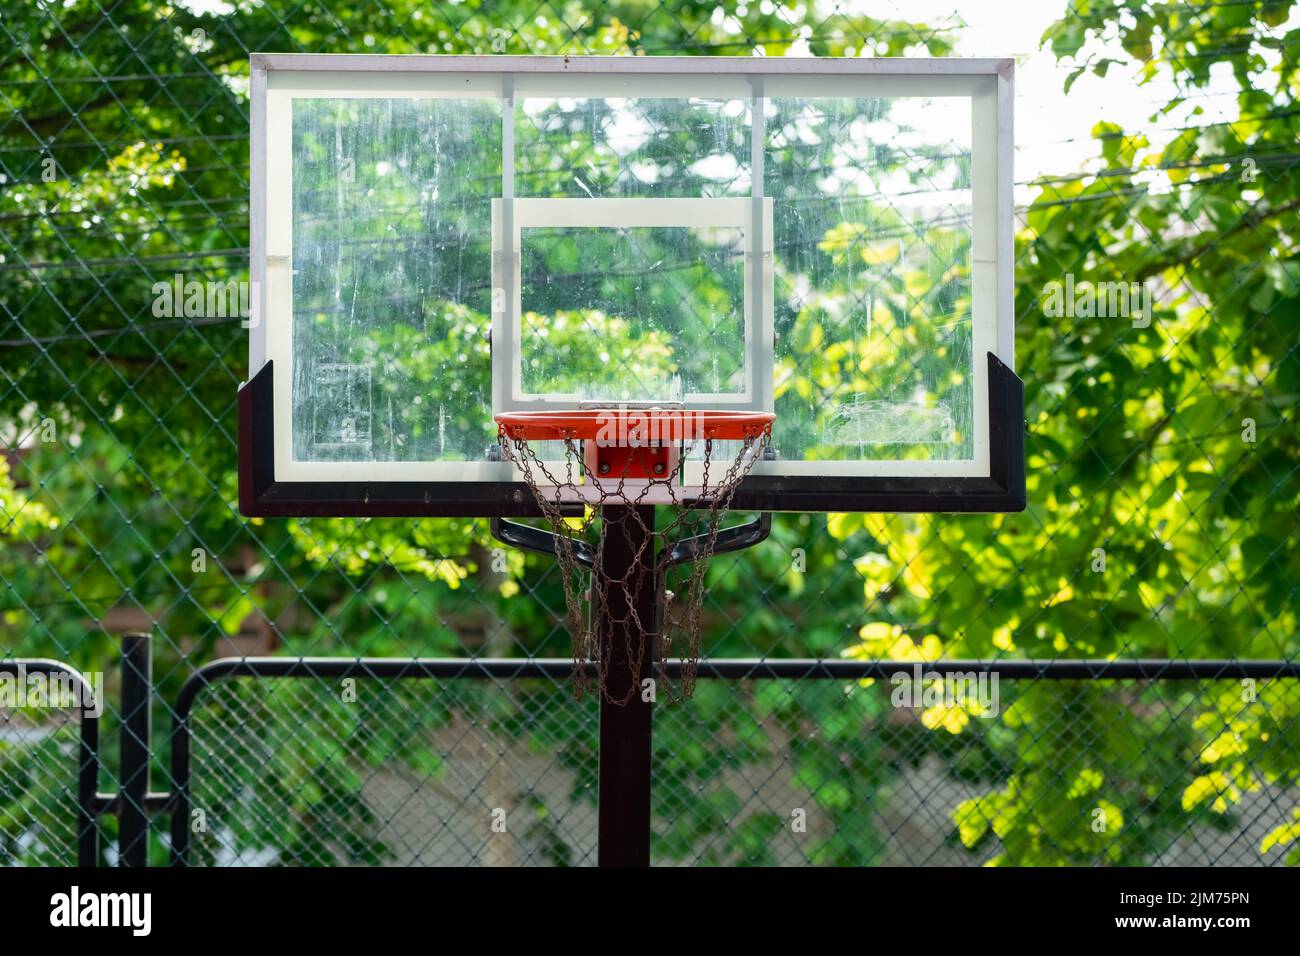 basketball backboard is translucent that the green trees in the background can be seen. Stock Photo